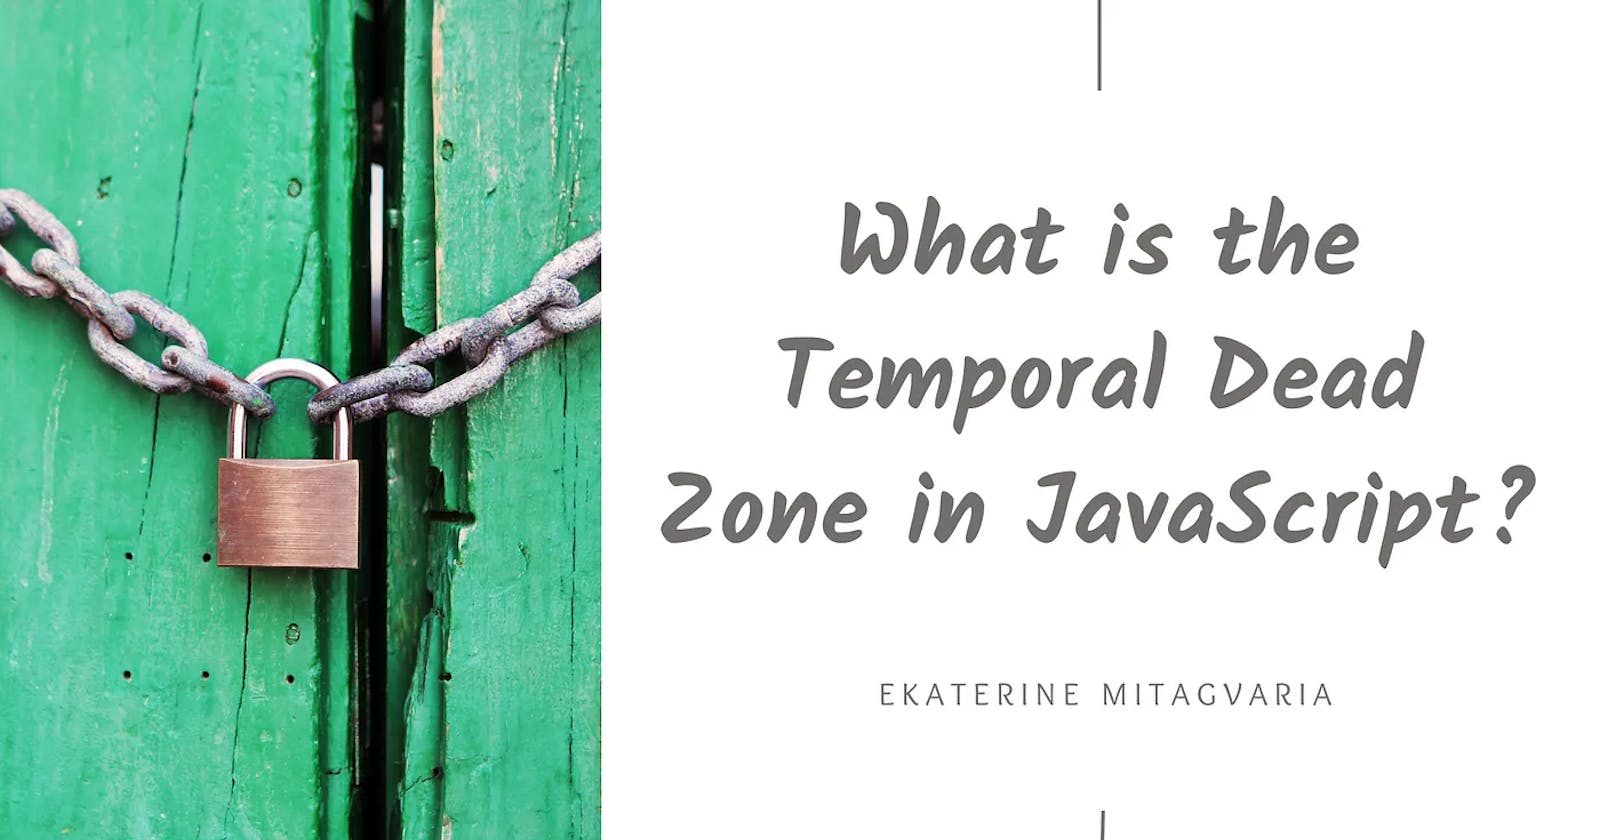 What is the Temporal Dead Zone in JavaScript?